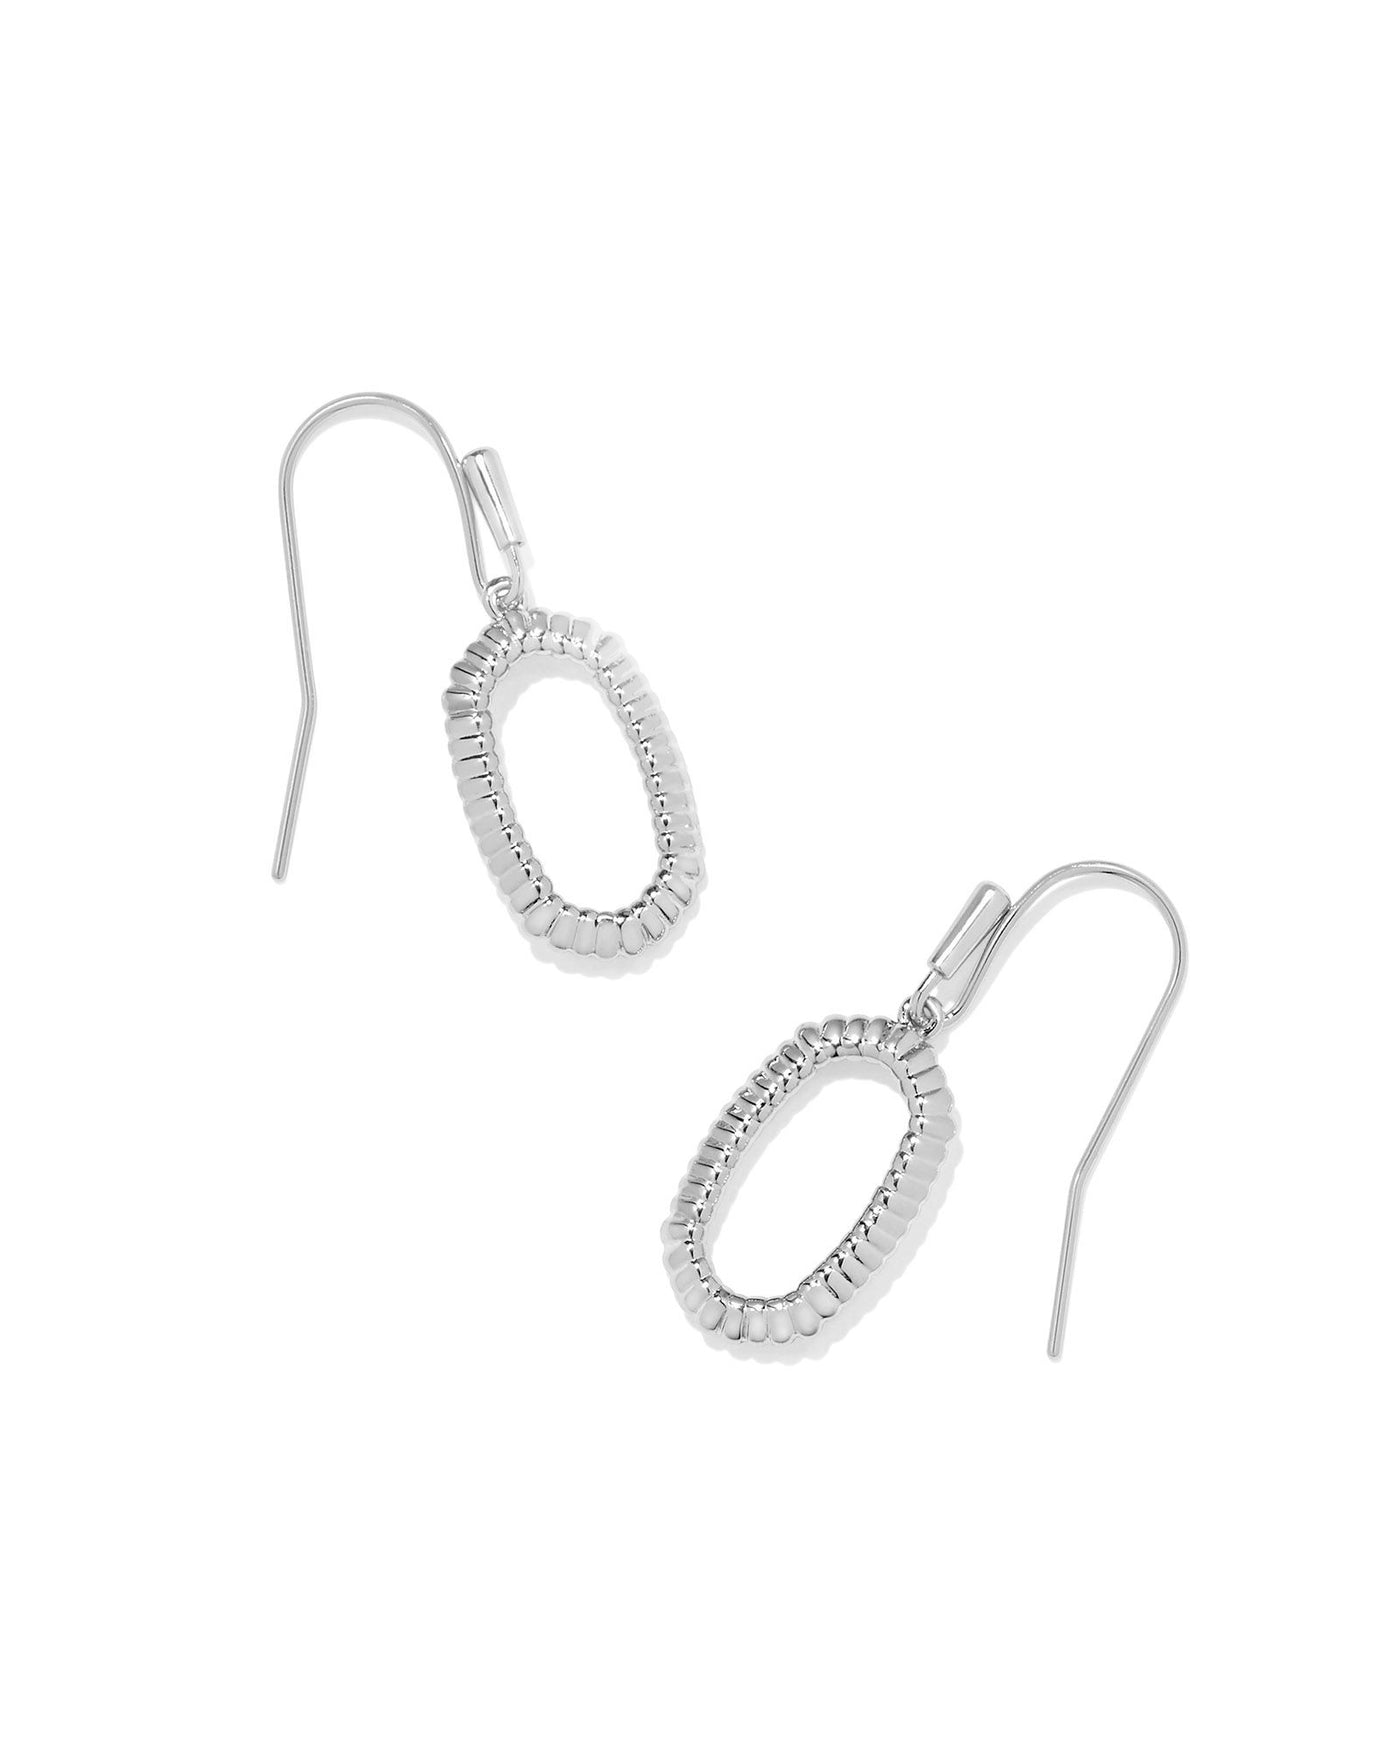 Kendra Scott Lee Ridge Open Frame Earrings-Earrings-Kendra Scott-Market Street Nest, Fashionable Clothing, Shoes and Home Décor Located in Mabank, TX